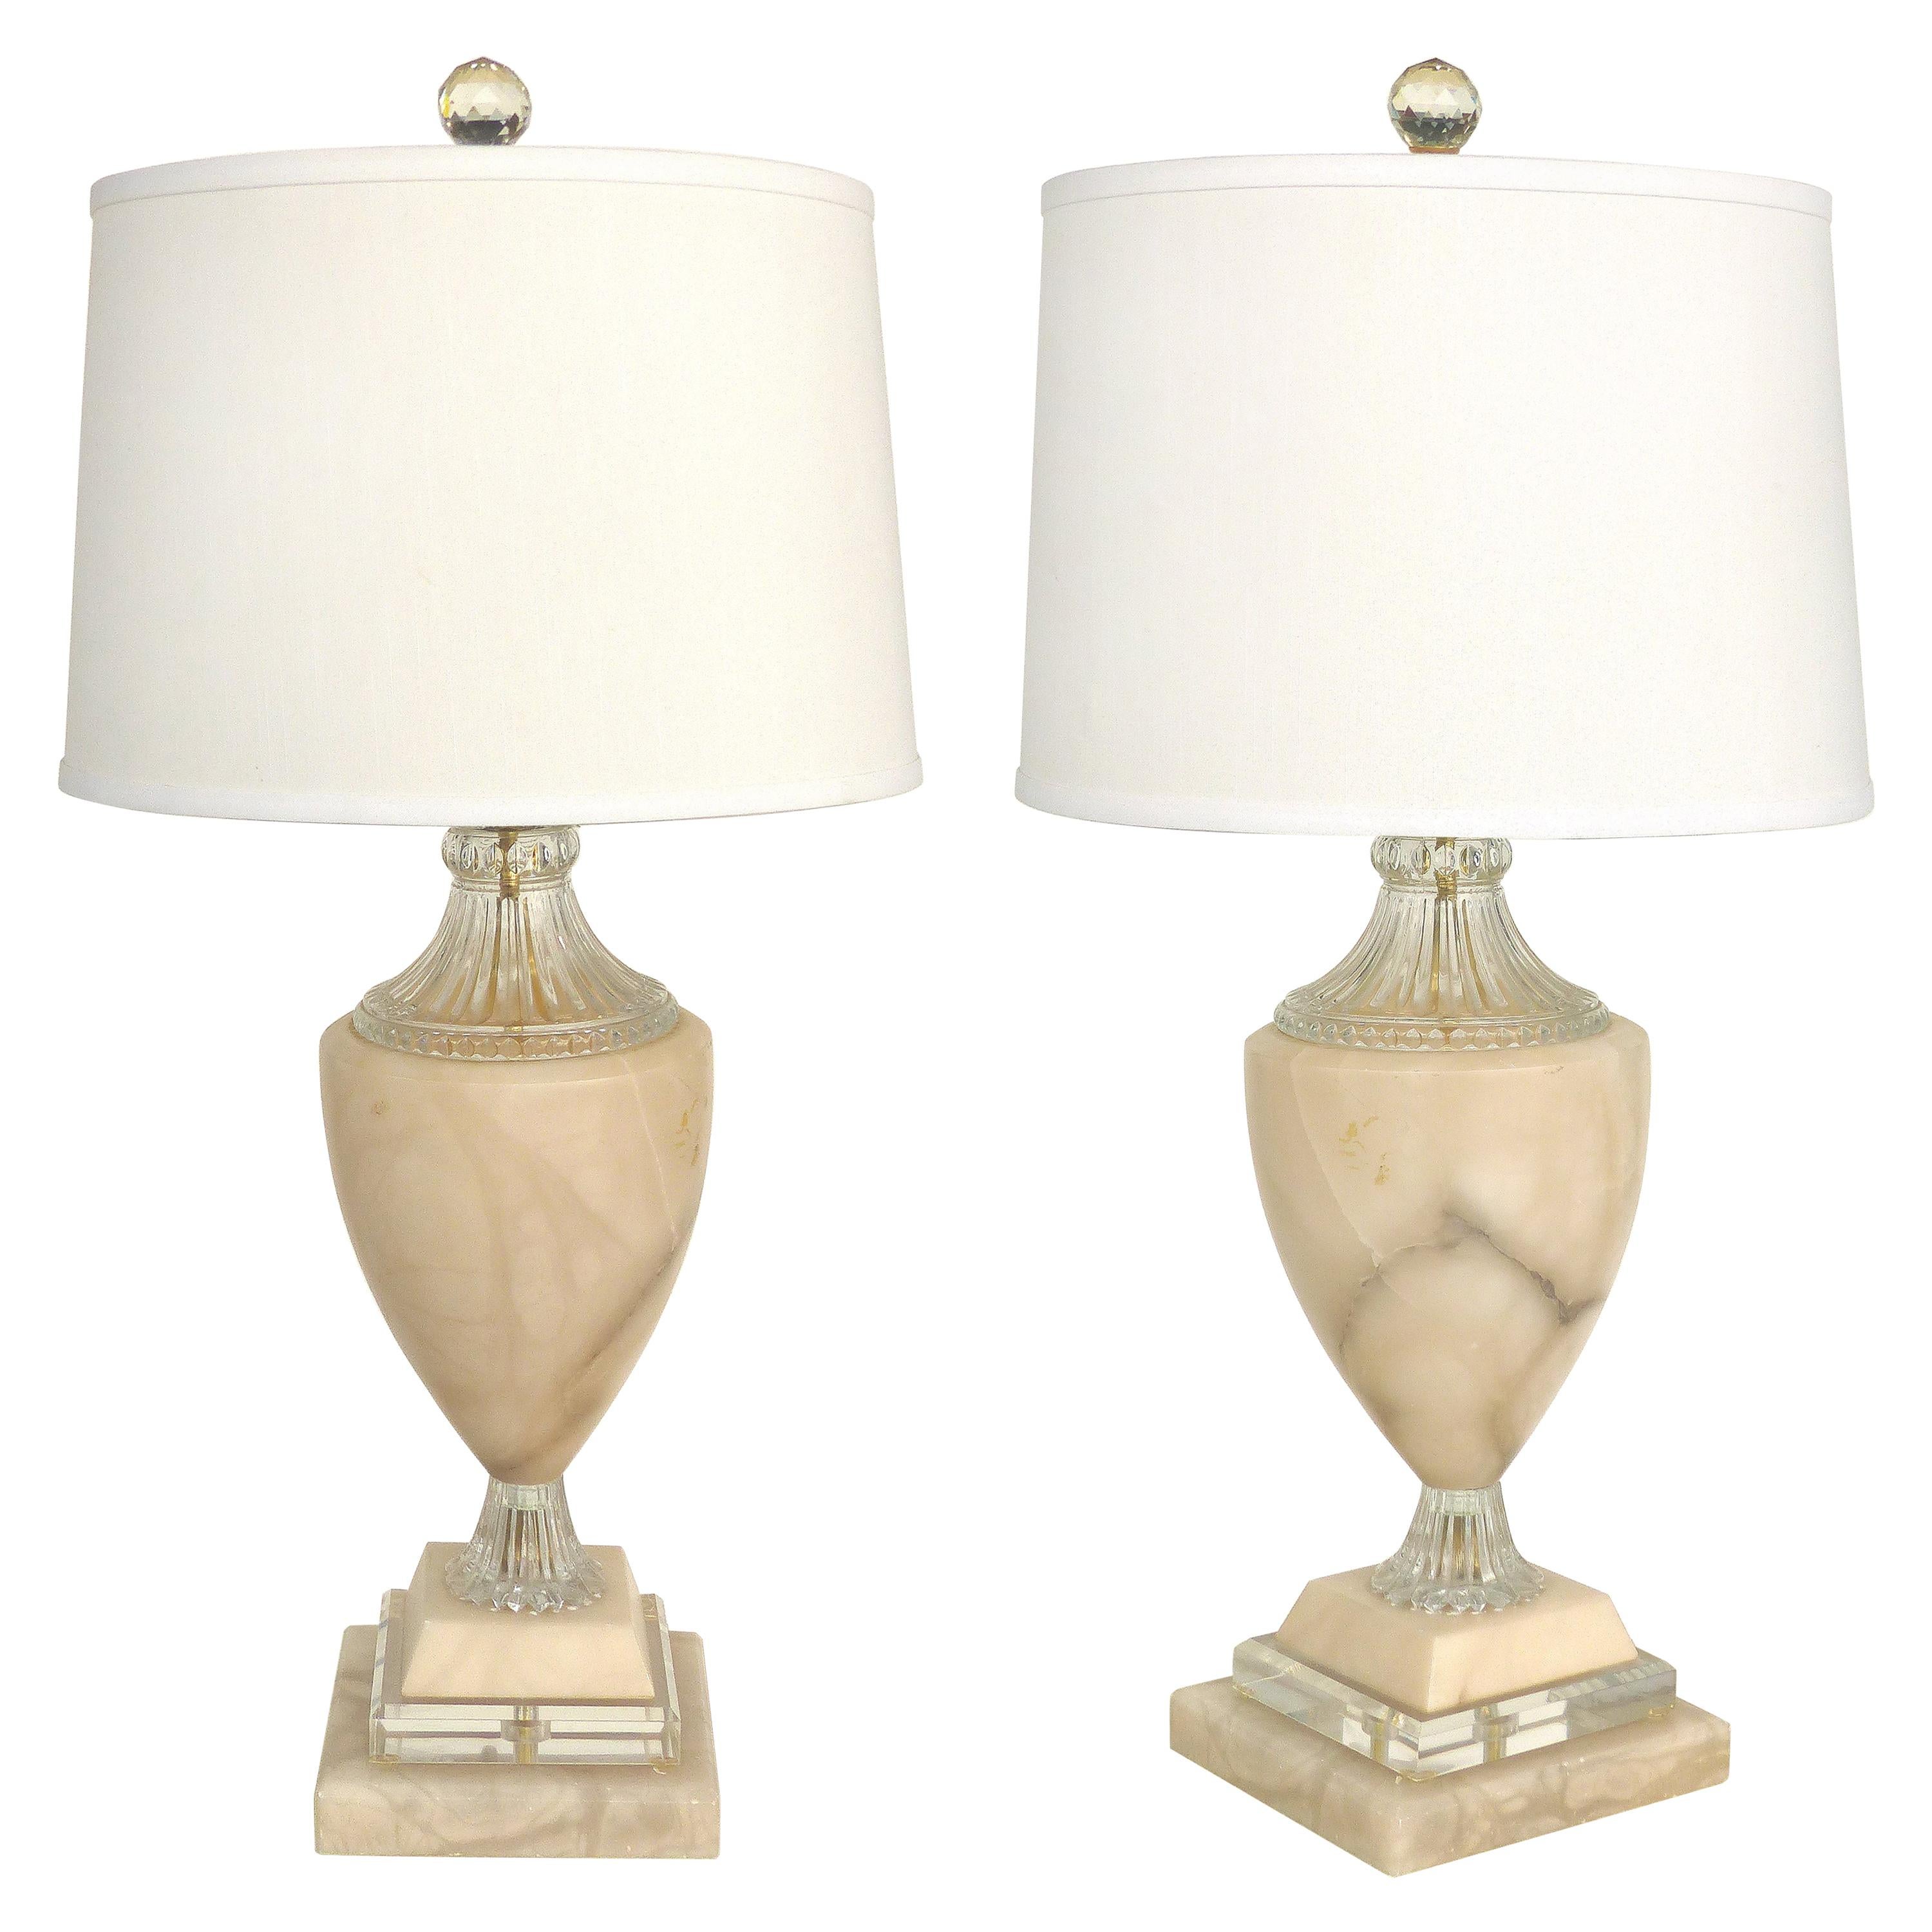 Traditional Alabaster Urn Form Table Lamps with Glass and Crystal Accents, Pair